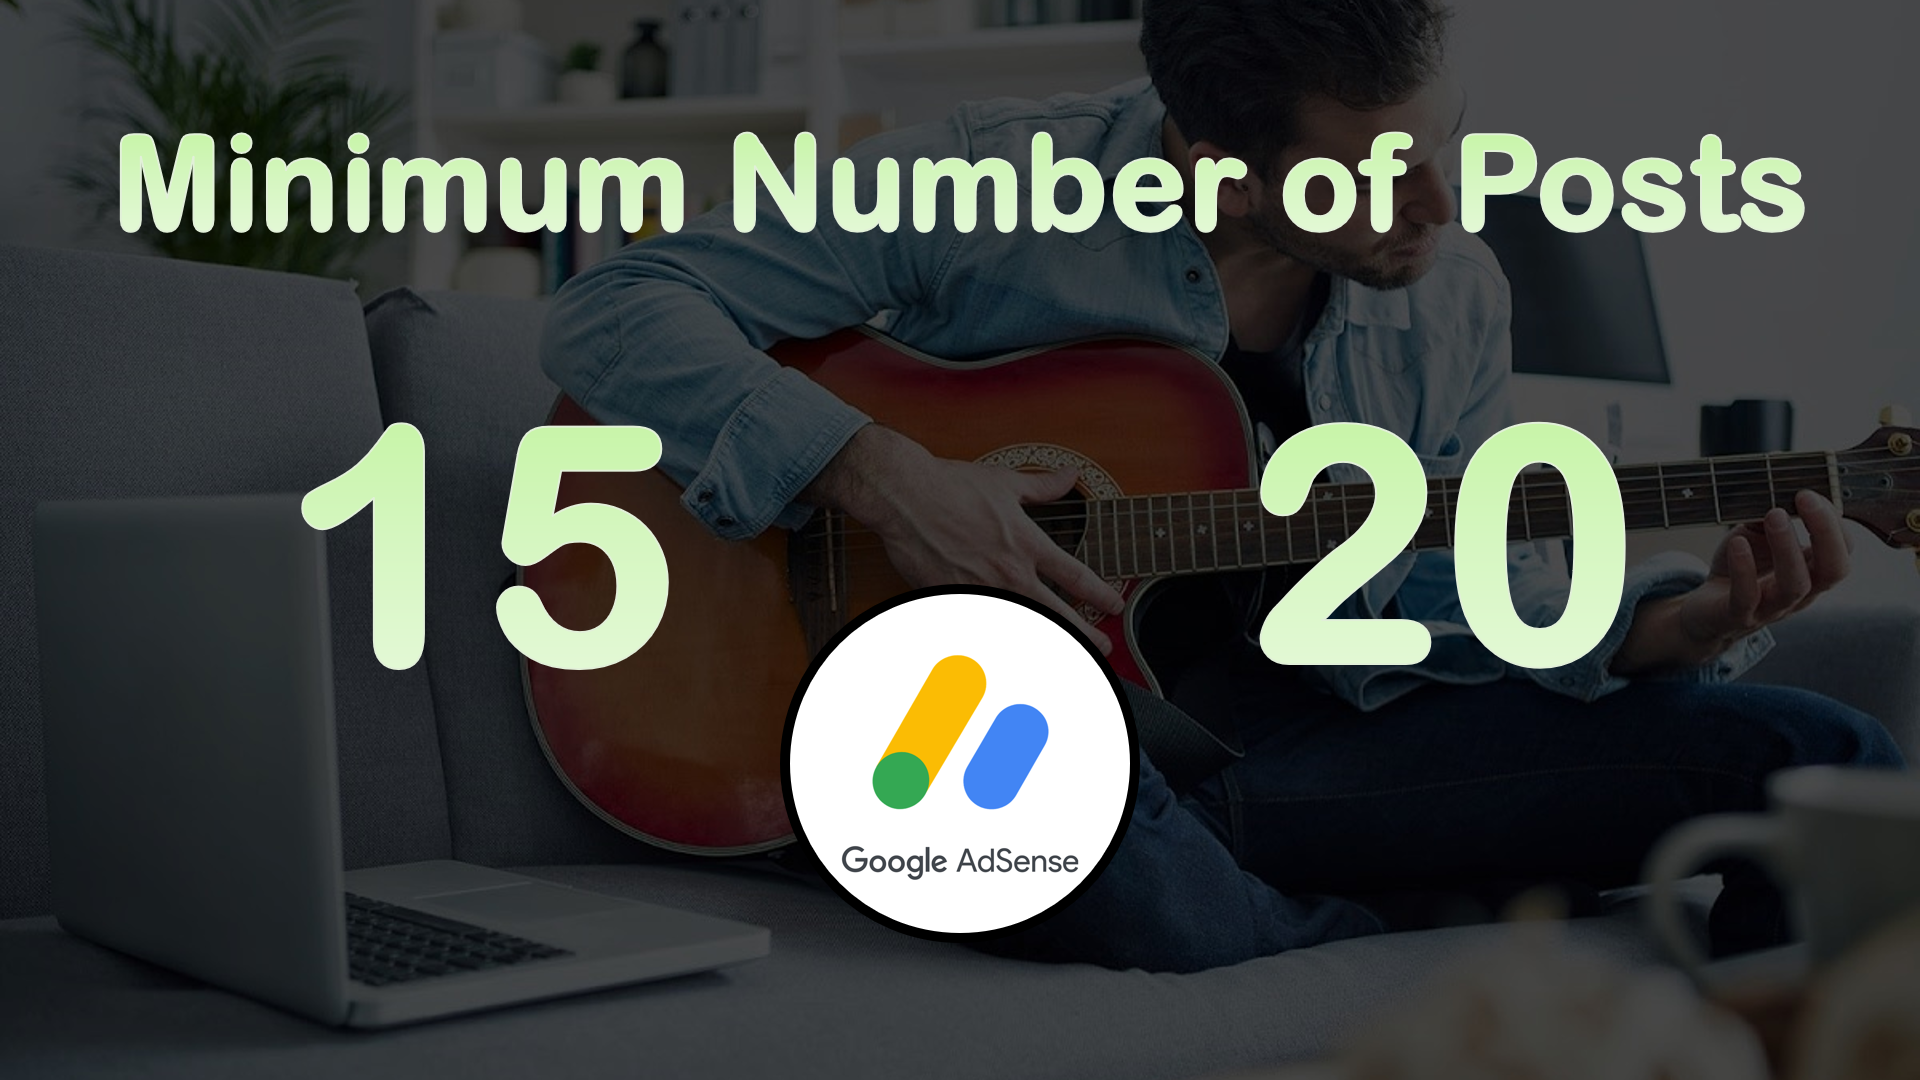 Minimum Number of Posts Required to get Google AdSense approval